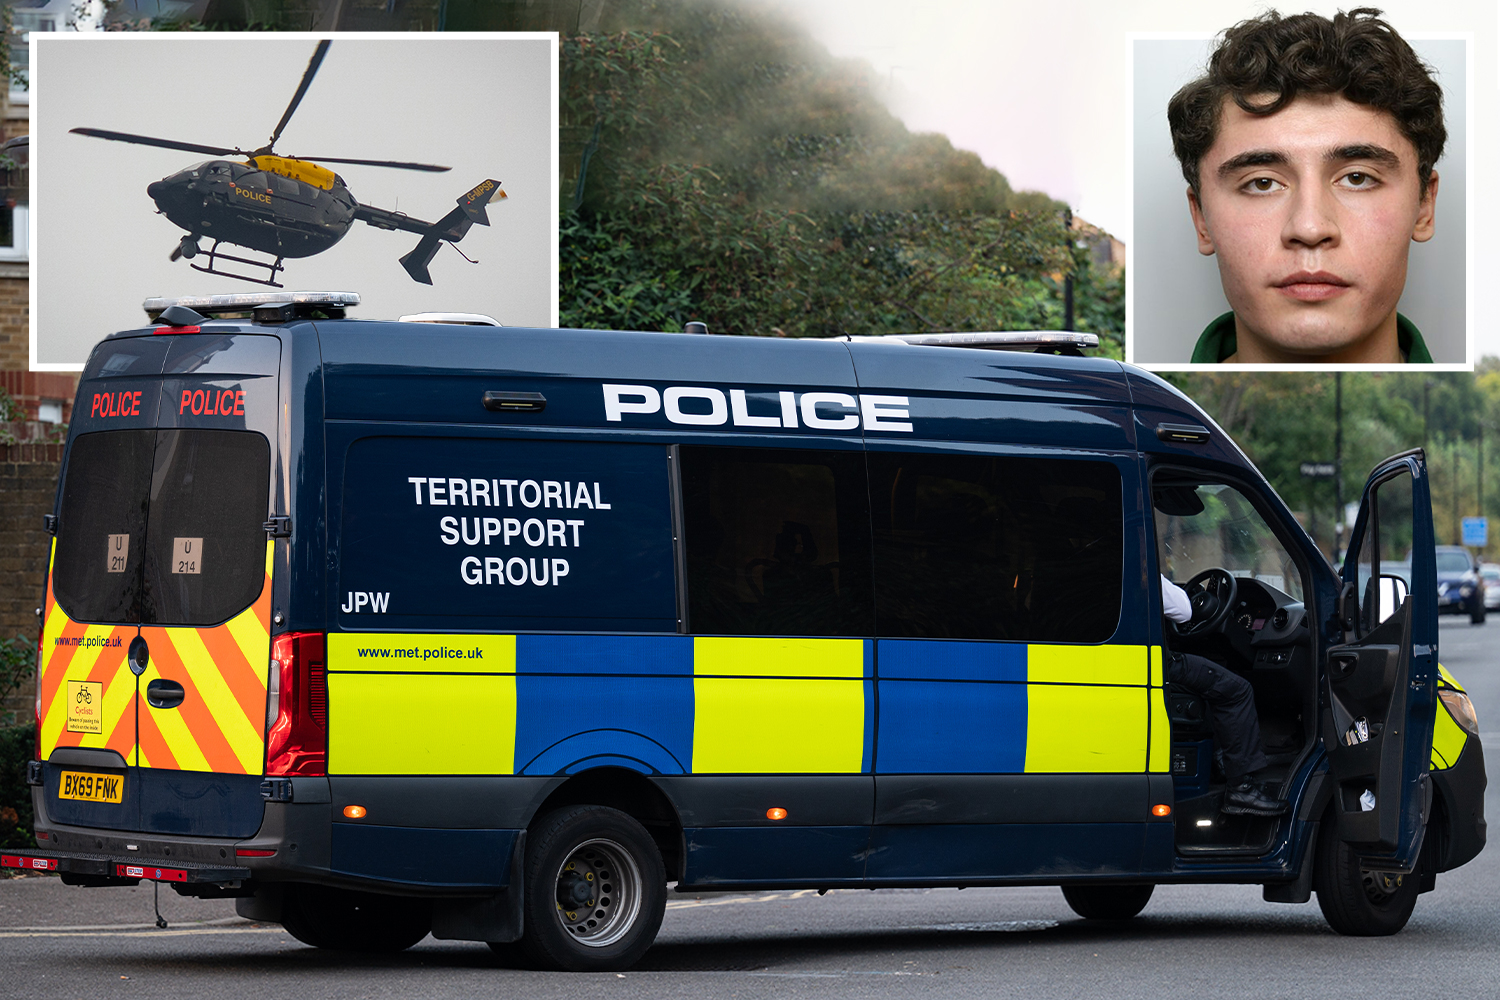 Daniel Khalife CAUGHT by police four days after ‘terrorist’ escaped from HMP Wandsworth sparking huge manhunt